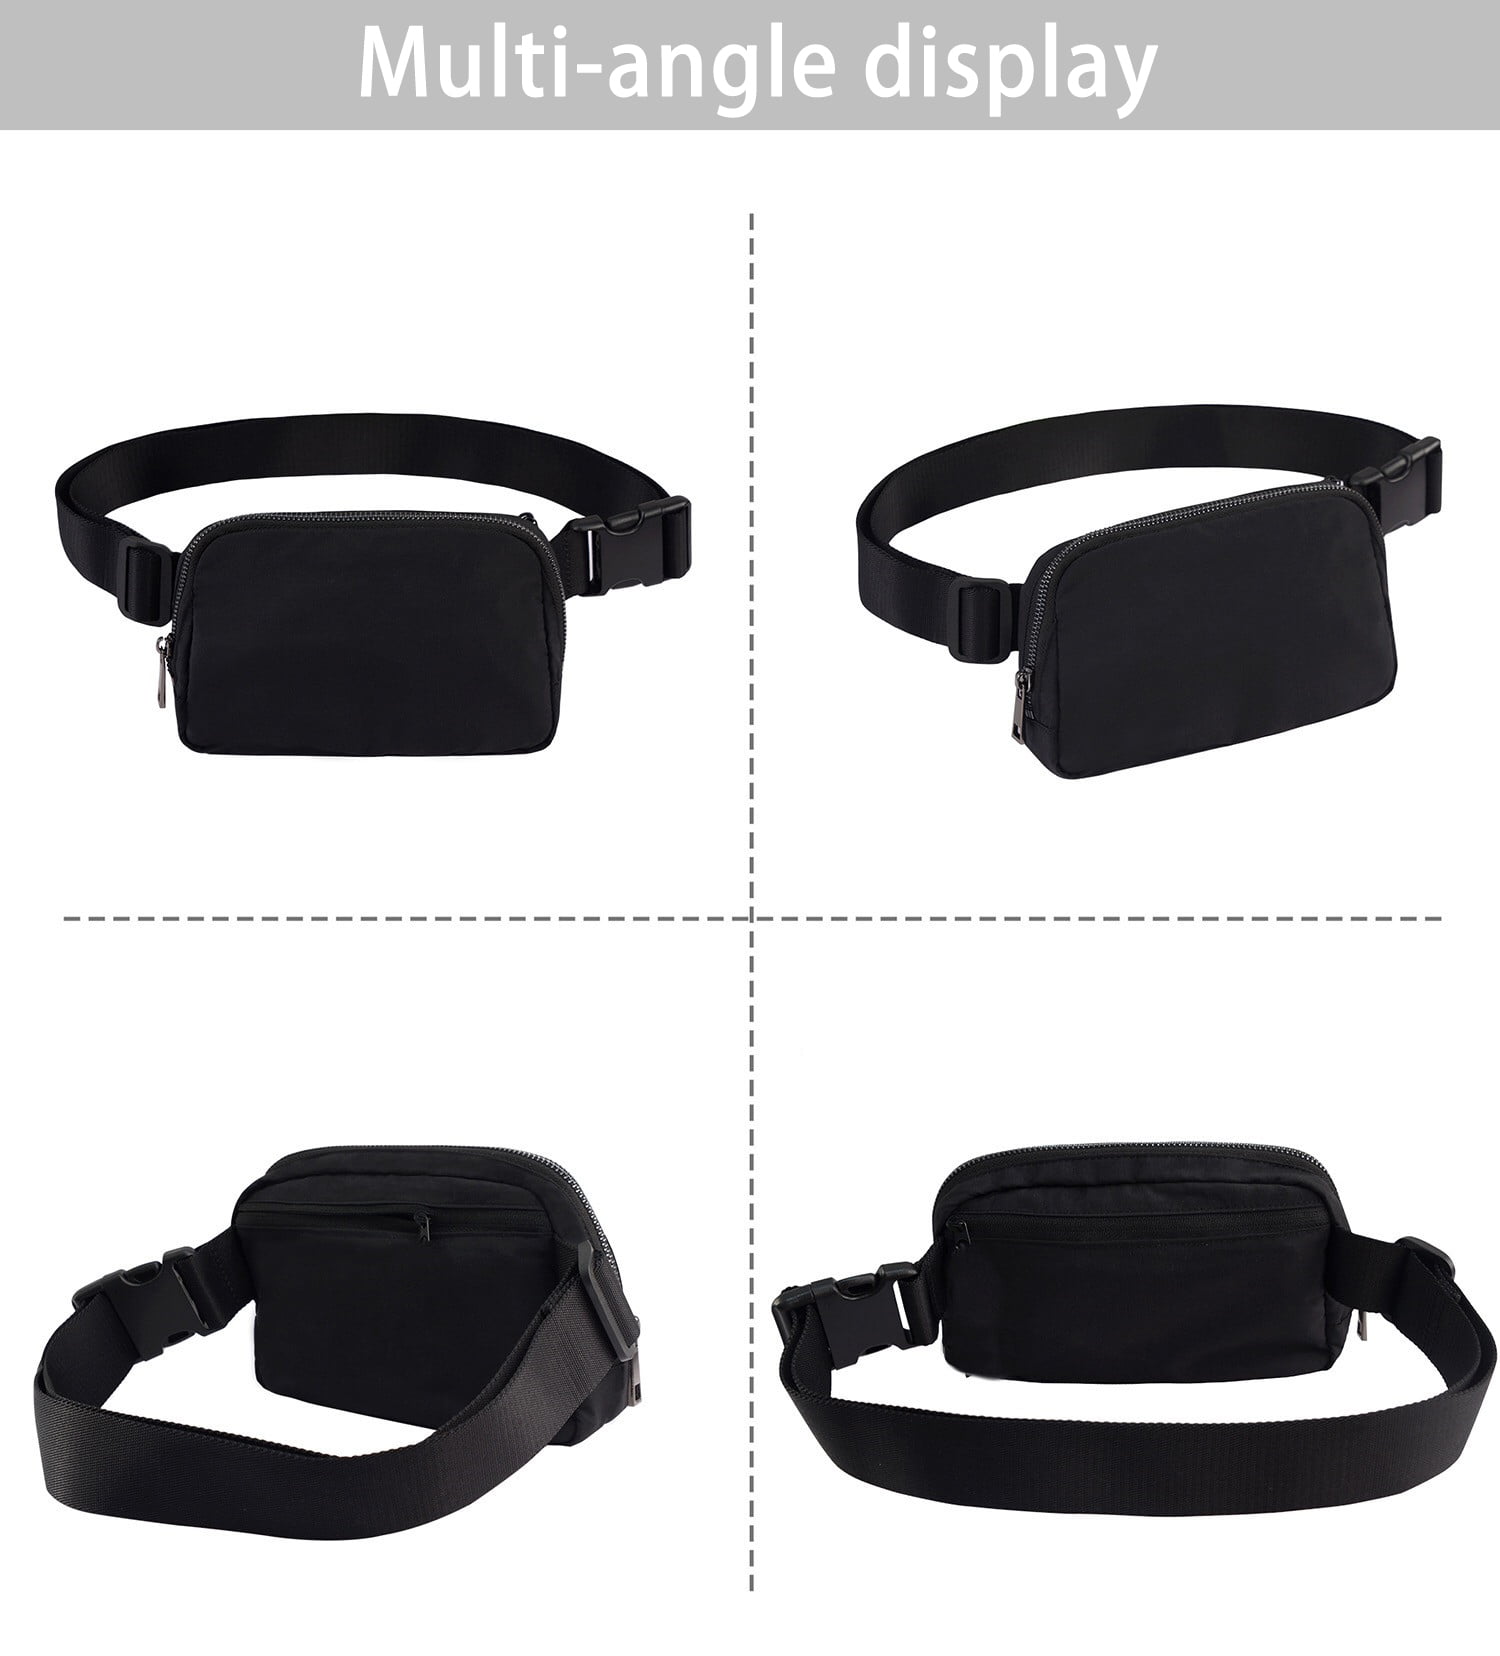 Seadamoo Mini Black Fanny Pack Crossbody Bags for Women and Men, Waterproof  Belt Bag with Adjustable Strap for Traveling Running Hiking Cycling.